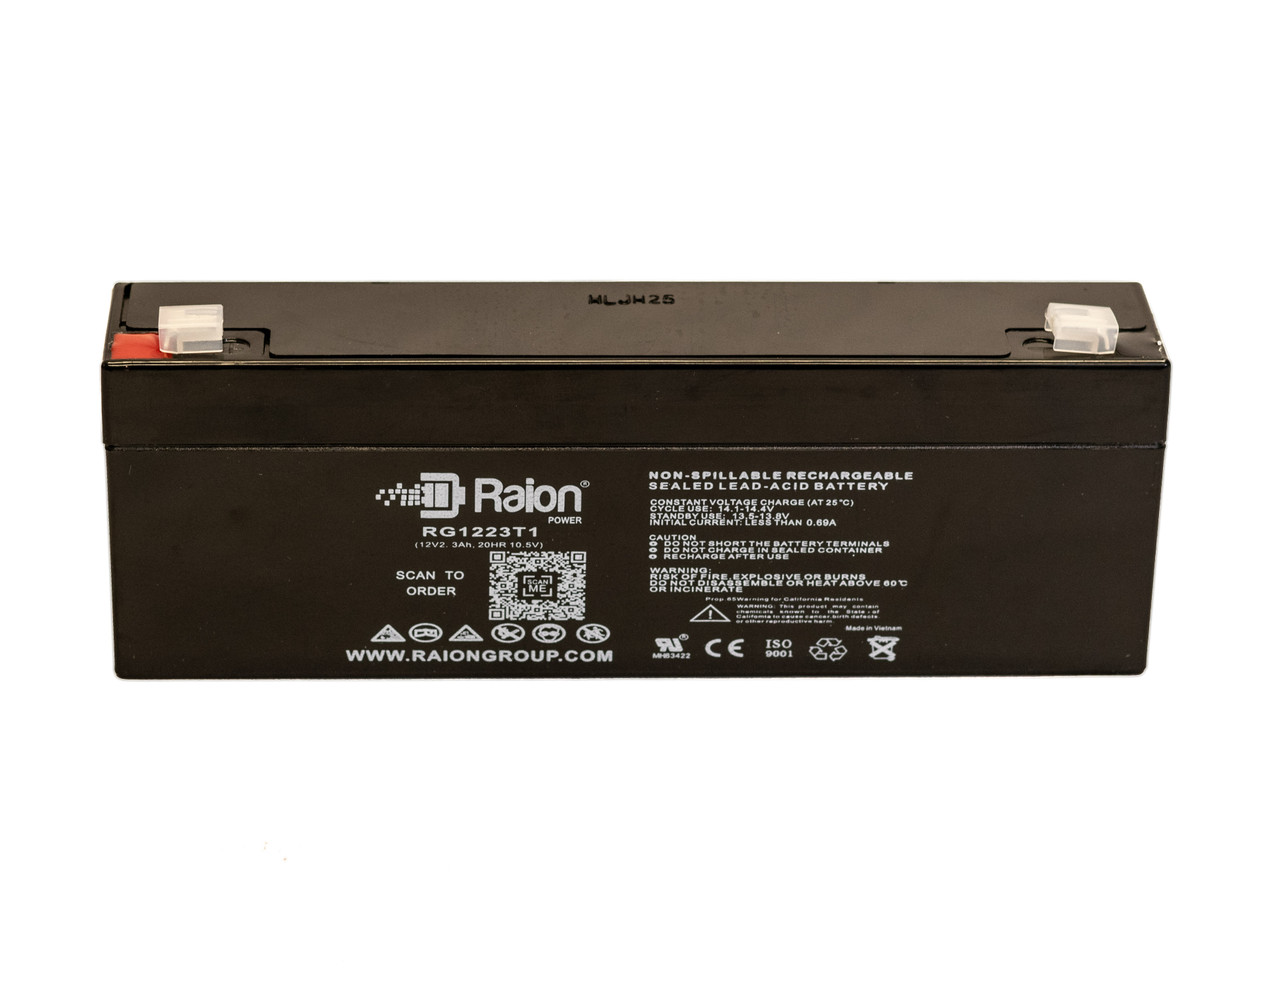 Raion Power 12V 2.3Ah SLA Battery With T1 Terminals For Baxter Healthcare AS 5A Auto Syringe